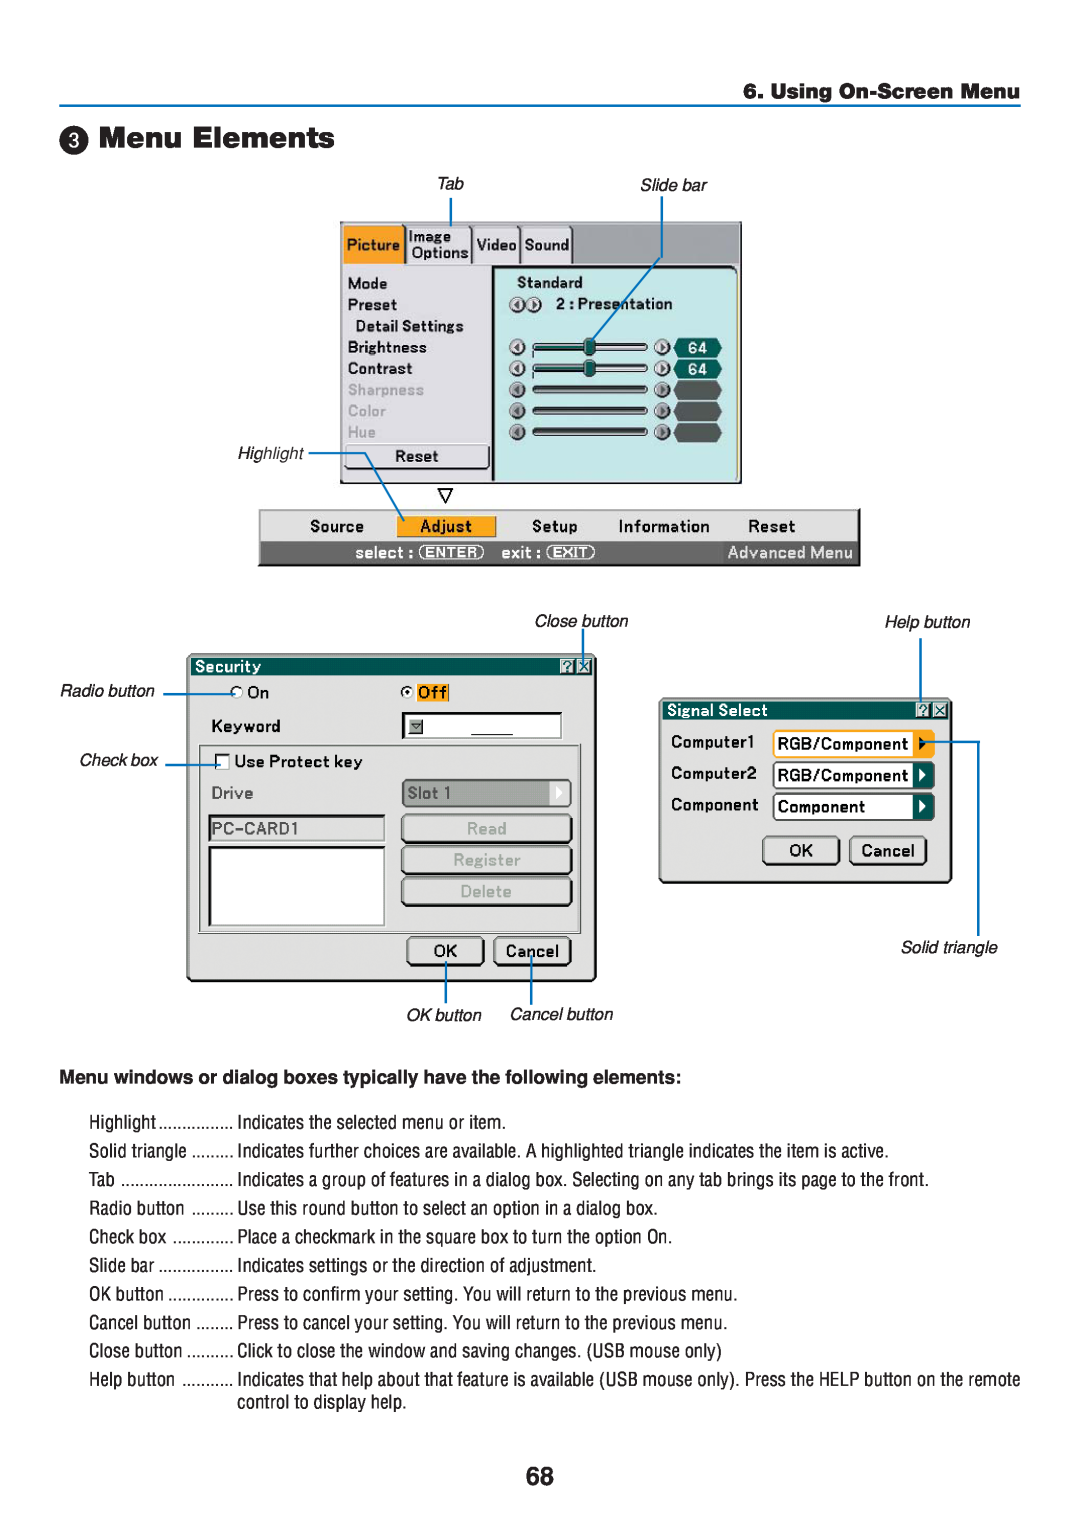 Dukane 8808 Menu Elements, Using On-Screen Menu, Menu windows or dialog boxes typically have the following elements 